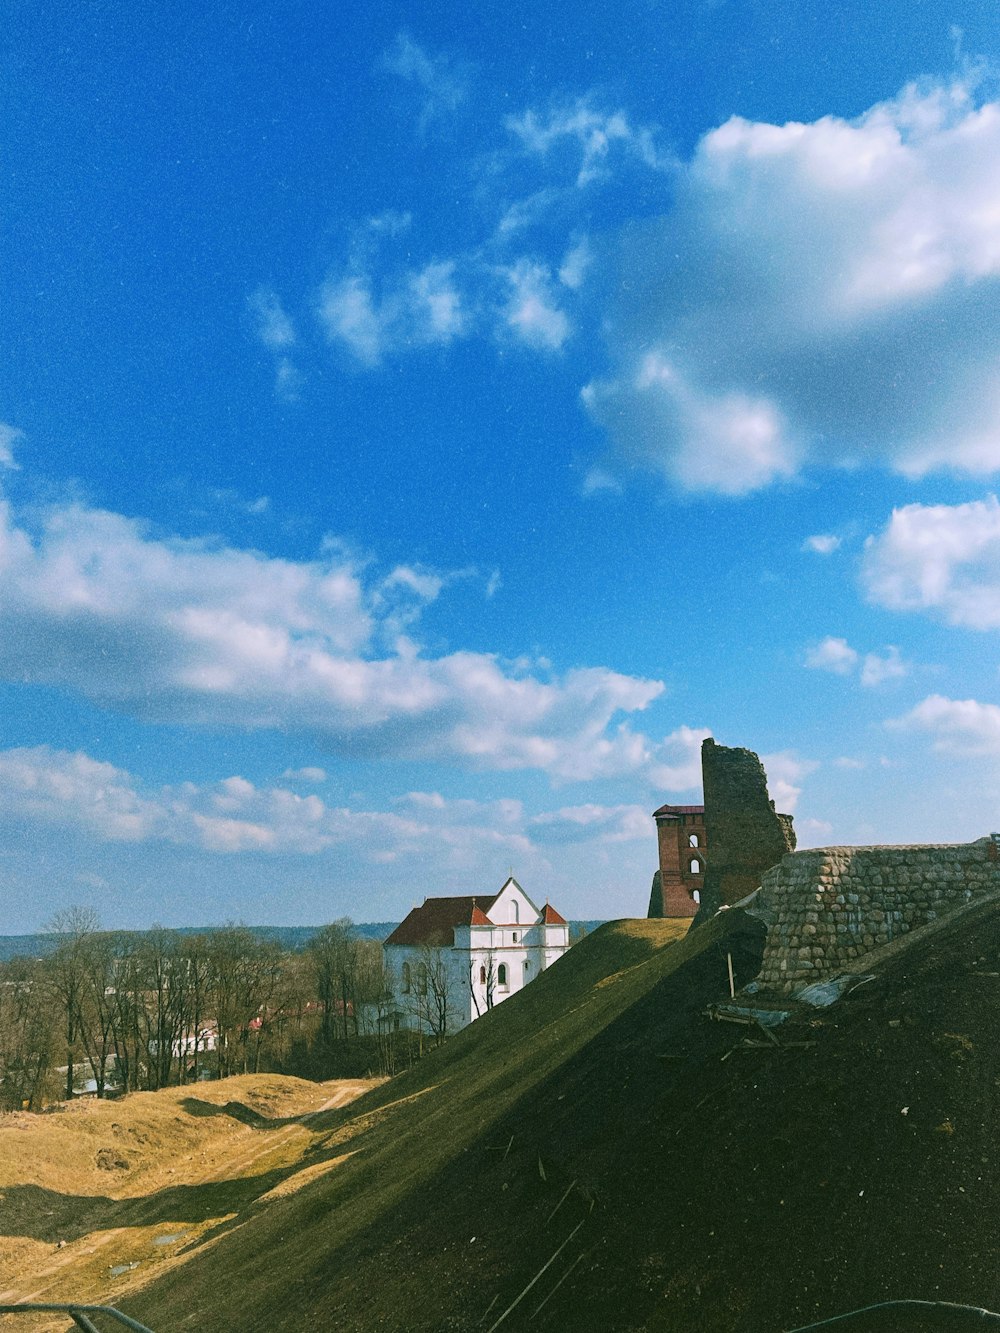 a house on a hill with a blue sky in the background